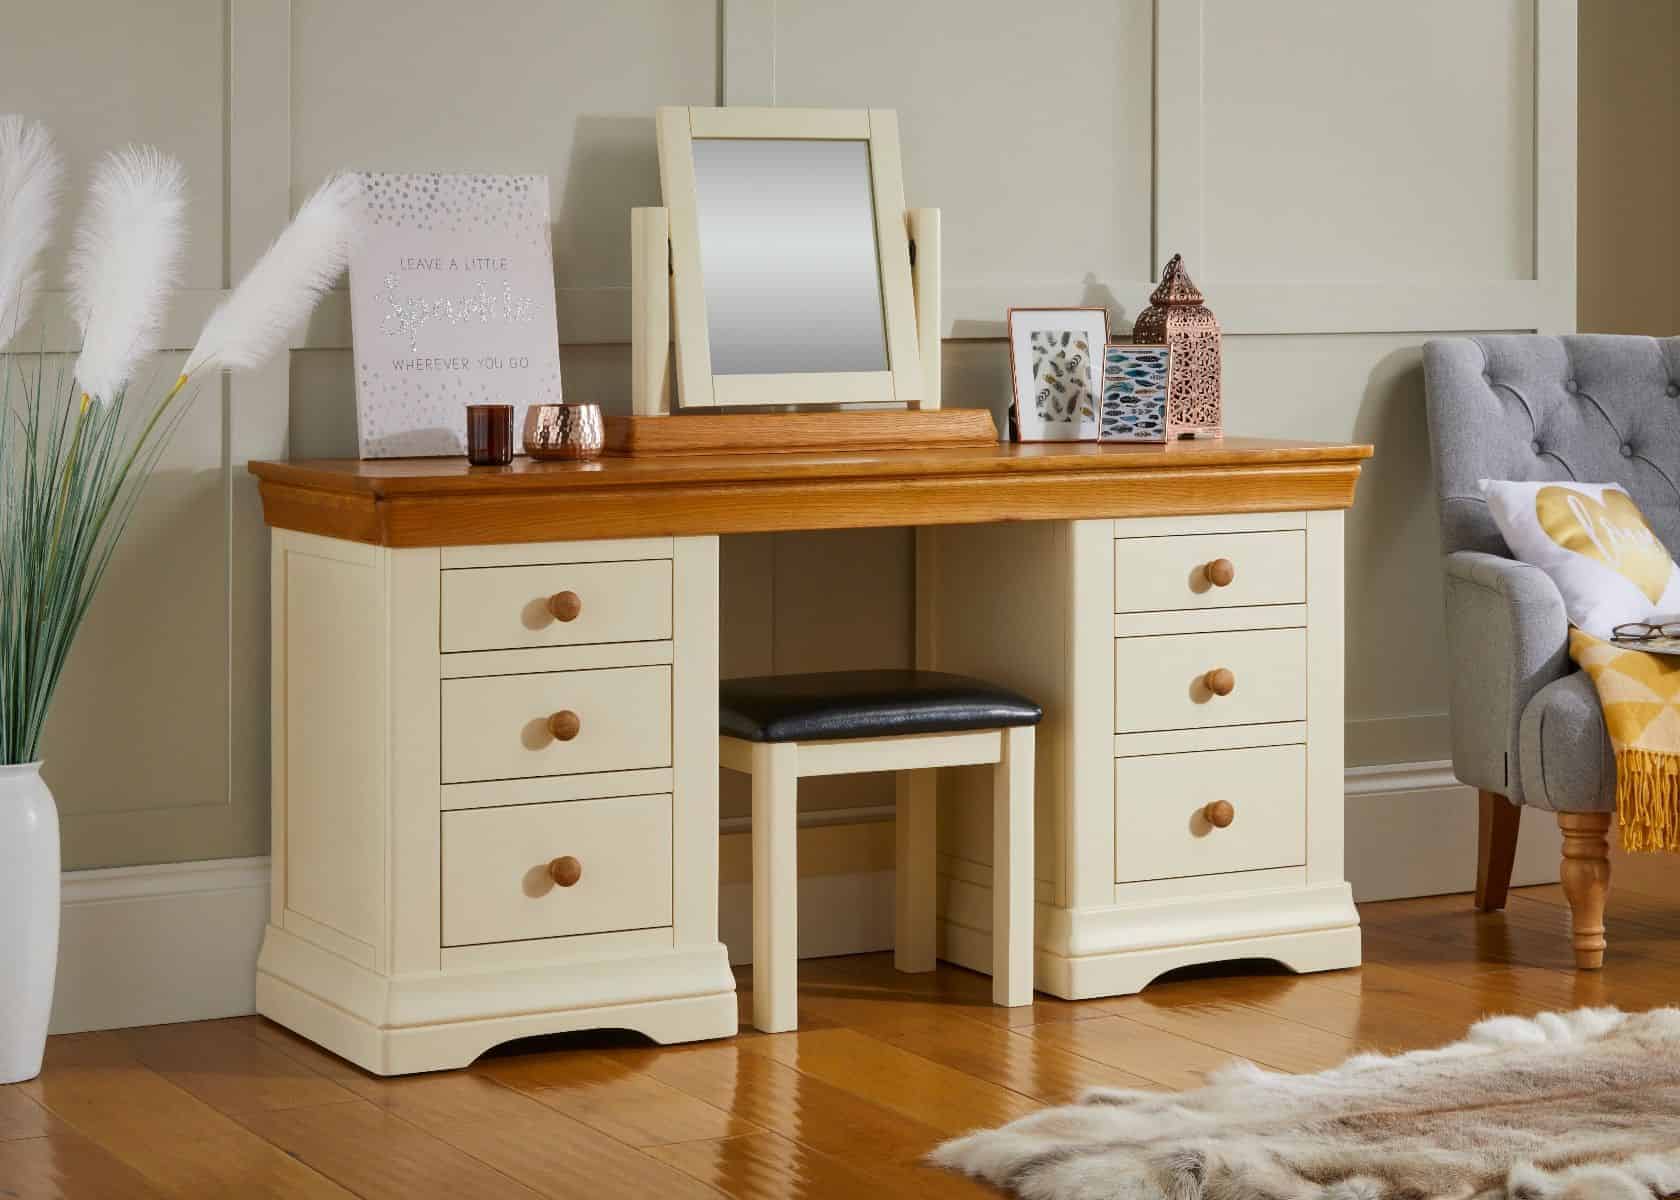 A white-color sturdy vanity design with a small square mirror and lots of storage drawers in a room.